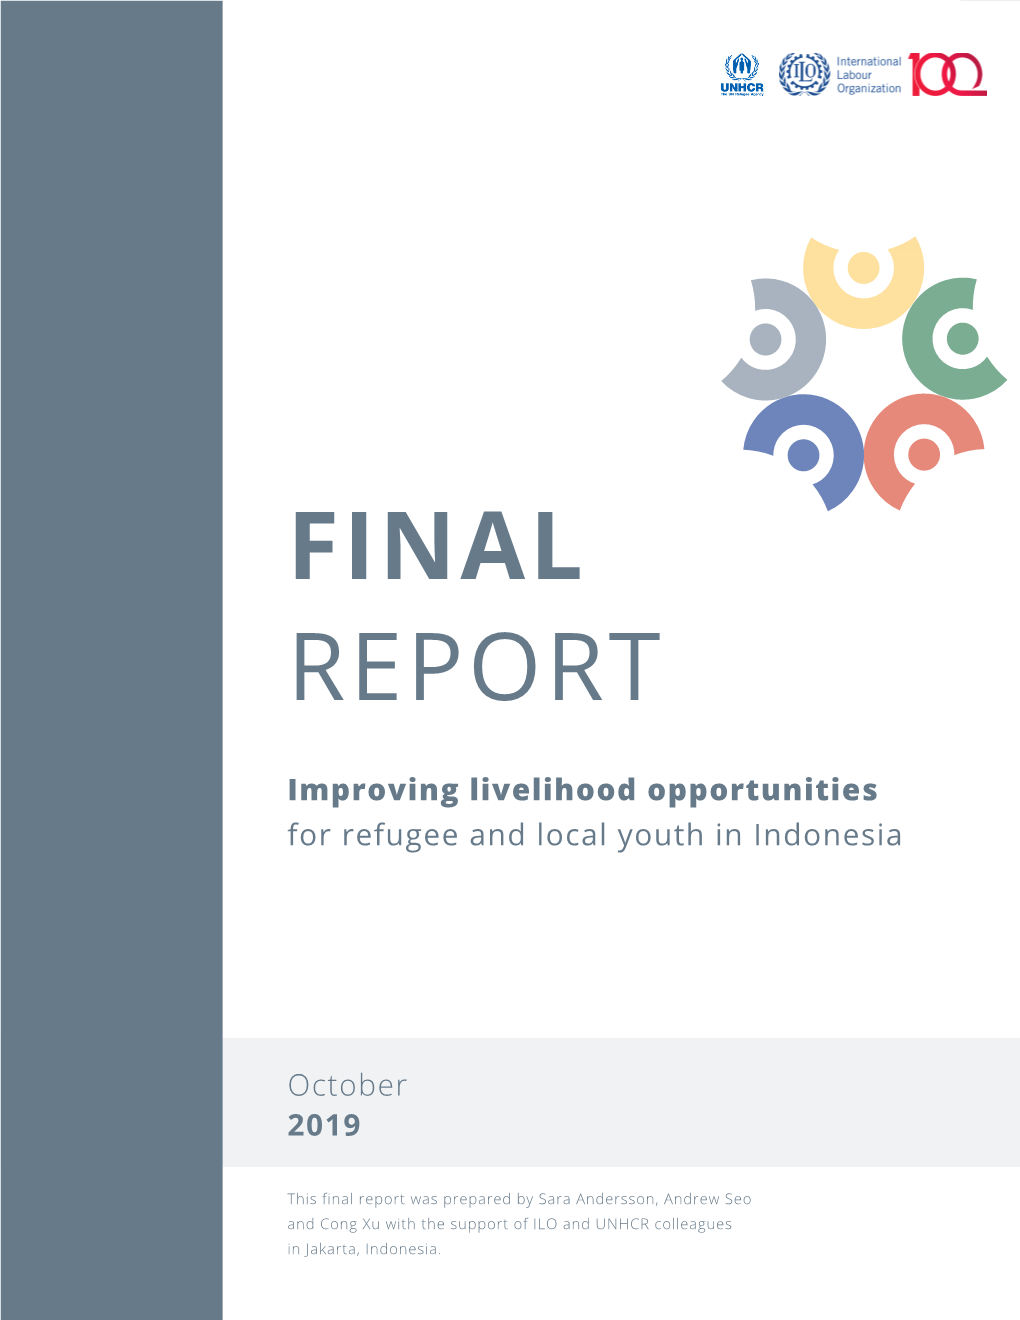 Final Report: Improving Livelihood Opportunities for Refugees